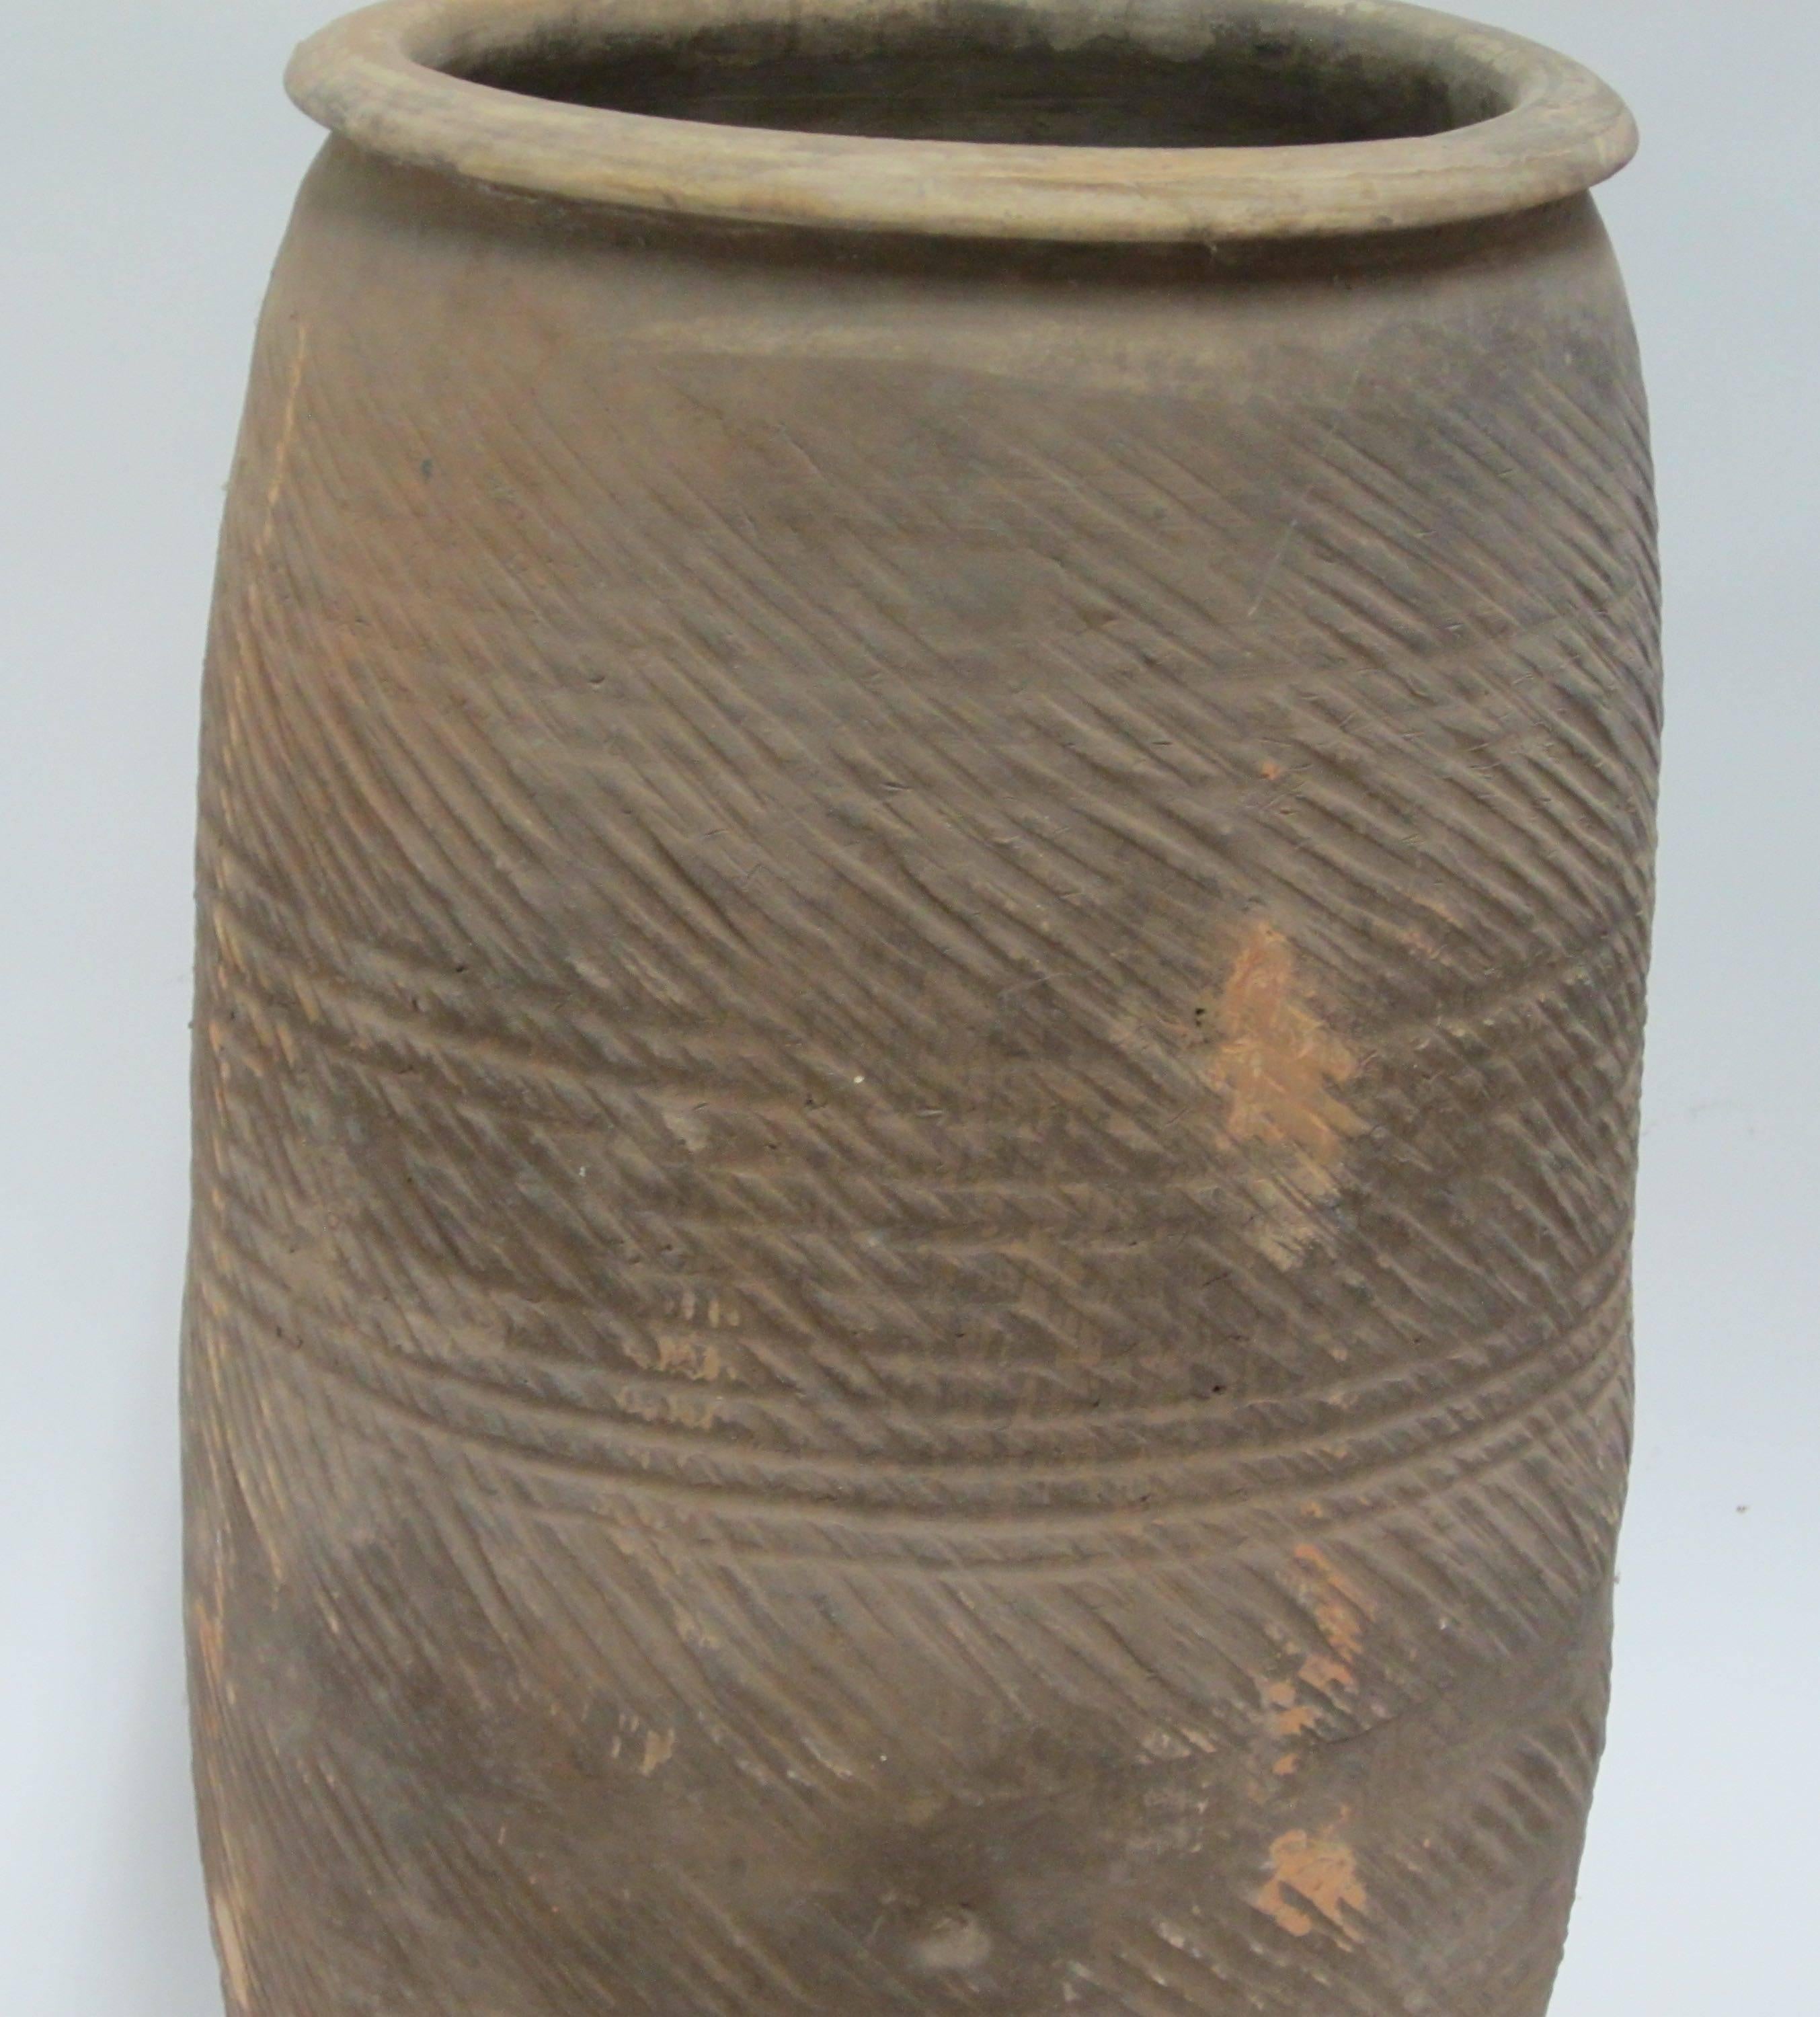 1920s Chinese textured vase.
Natural weathered patina.
Two are available and sold individually.
S4542A is 9